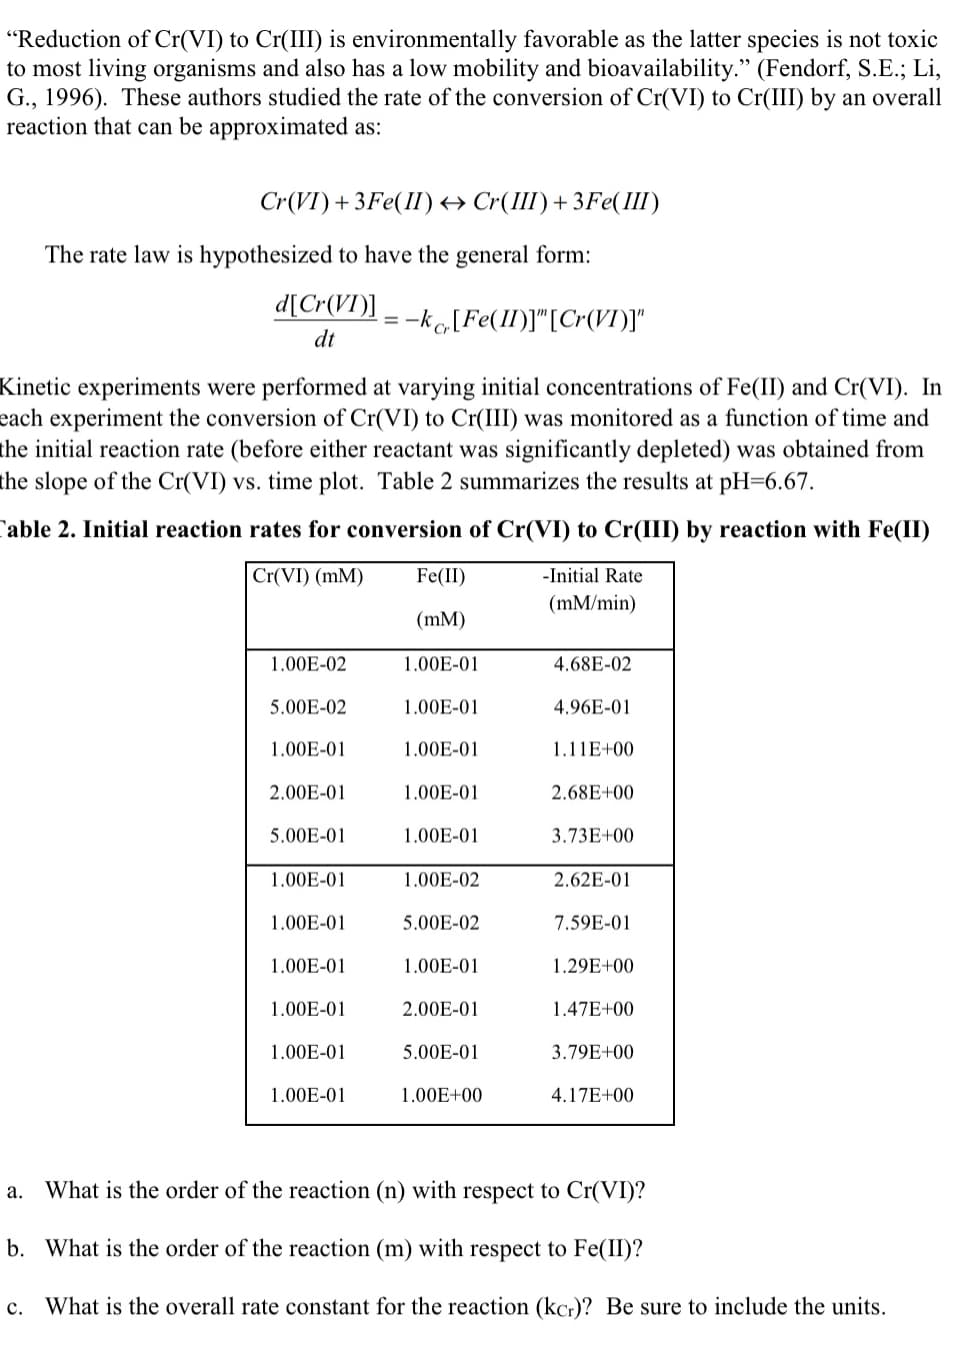 "Reduction of Cr(VI) to Cr(III) is environmentally favorable as the latter species is not toxic
to most living organisms and also has a low mobility and bioavailability." (Fendorf, S.E.; Li,
G., 1996). These authors studied the rate of the conversion of Cr(VI) to Cr(III) by an overall
reaction that can be approximated as:
Cr(VI) + 3Fe(II) ↔ Cr(III) + 3Fe(III)
The rate law is hypothesized to have the general form:
d[Cr(VI)]
dt
=-kc [Fe(II)]" [Cr(VI)]"
Kinetic experiments were performed at varying initial concentrations of Fe(II) and Cr(VI). In
each experiment the conversion of Cr(VI) to Cr(III) was monitored as a function of time and
the initial reaction rate (before either reactant was significantly depleted) was obtained from
the slope of the Cr(VI) vs. time plot. Table 2 summarizes the results at pH=6.67.
Table 2. Initial reaction rates for conversion of Cr(VI) to Cr(III) by reaction with Fe(II)
Cr(VI) (mm)
1.00E-02
5.00E-02
1.00E-01
2.00E-01
5.00E-01
1.00E-01
1.00E-01
1.00E-01
1.00E-01
1.00E-01
1.00E-01
Fe(II)
(mm)
1.00E-01
1.00E-01
1.00E-01
1.00E-01
1.00E-01
1.00E-02
5.00E-02
1.00E-01
2.00E-01
5.00E-01
1.00E+00
-Initial Rate
(mm/min)
4.68E-02
4.96E-01
1.11E+00
2.68E+00
3.73E+00
2.62E-01
7.59E-01
1.29E+00
1.47E+00
3.79E+00
4.17E+00
a. What is the order of the reaction (n) with respect to Cr(VI)?
b. What is the order of the reaction (m) with respect to Fe(II)?
C. What is the overall rate constant for the reaction (kcr)? Be sure to include the units.